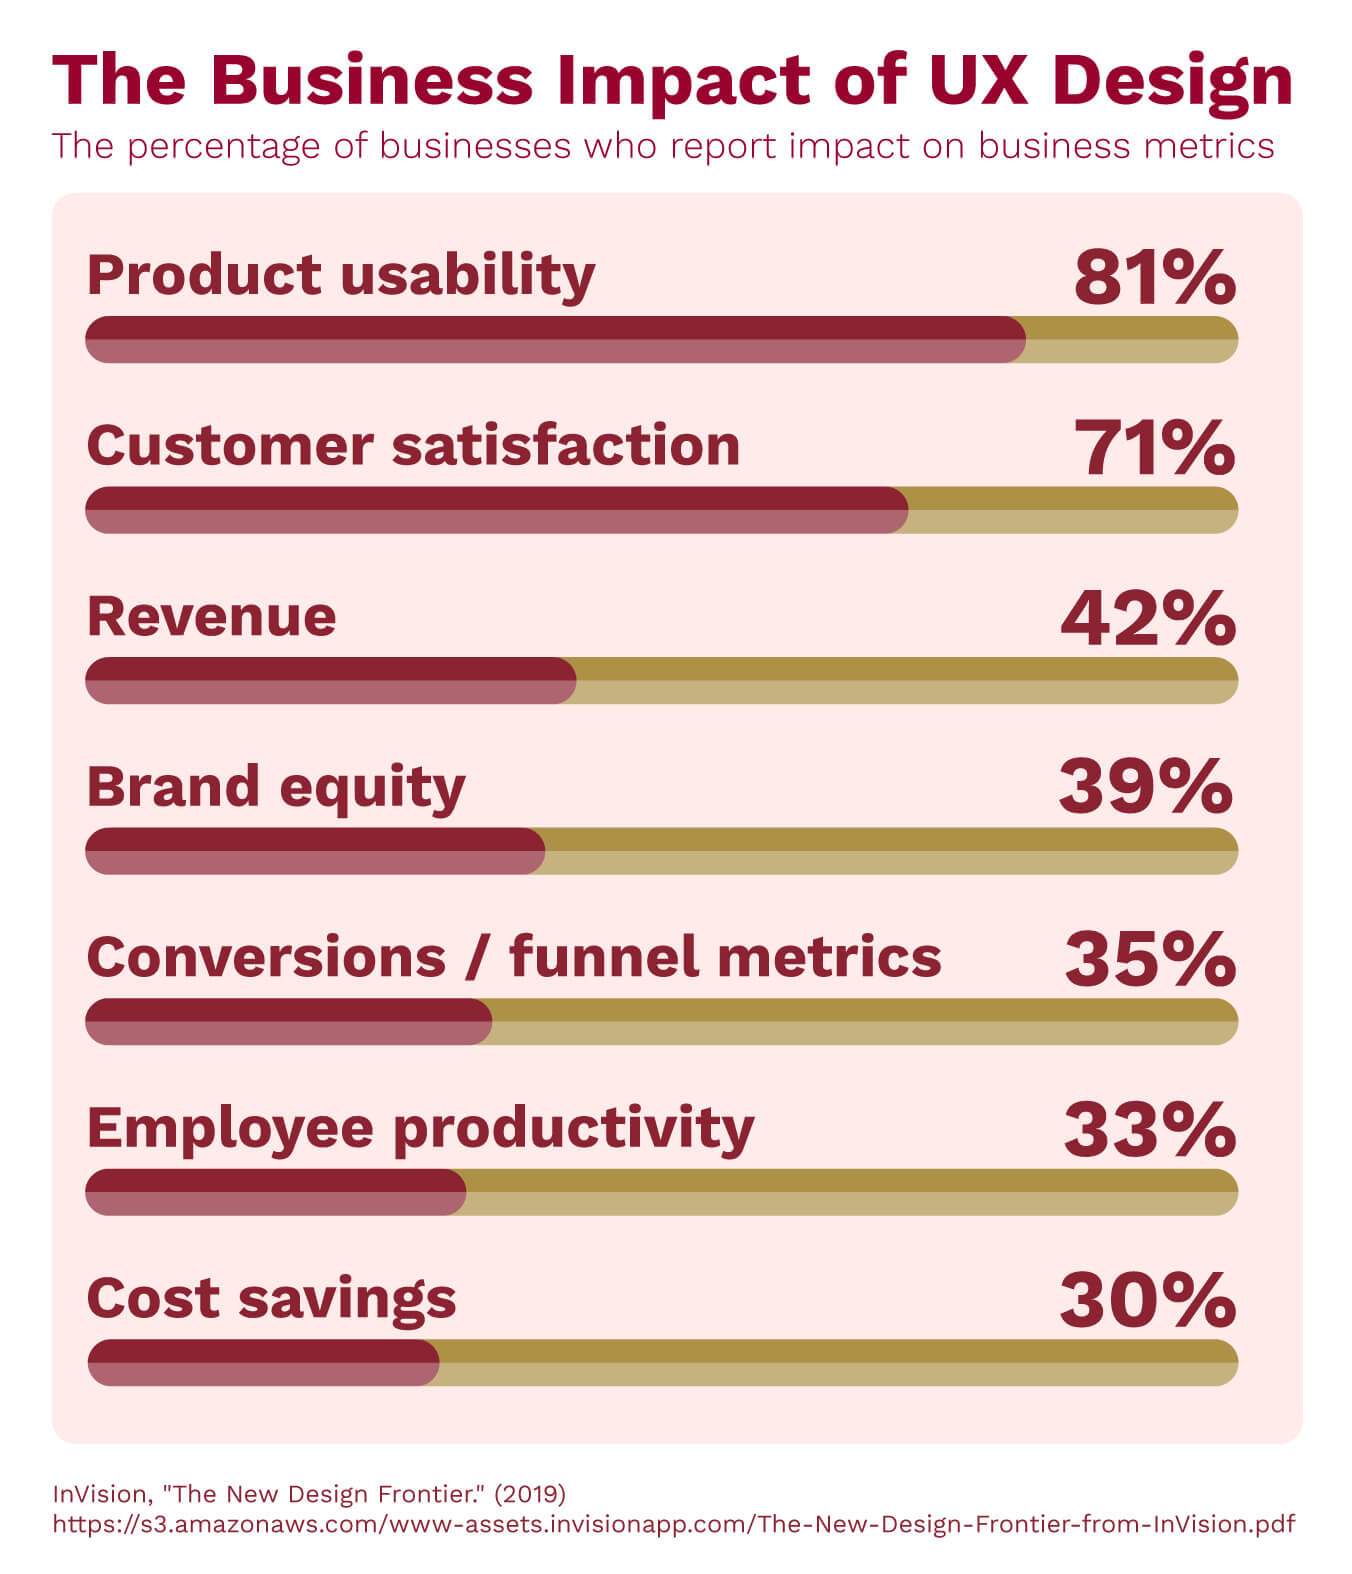 The percentage of businesses who report impact on business metrics